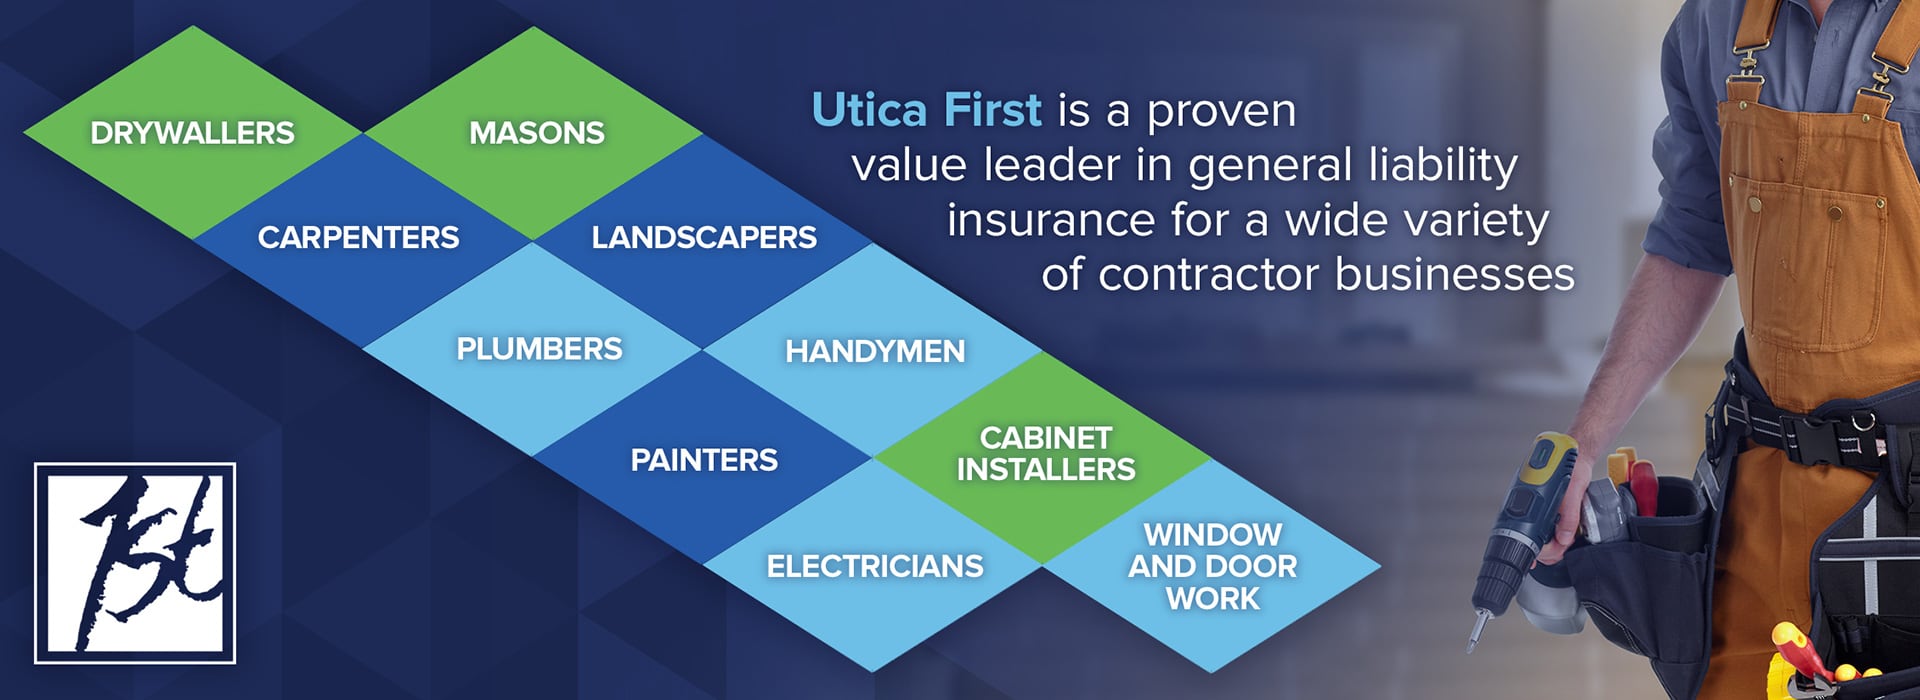 Utica First is a proven value leader in general liability insurance for a wide variety of contractor businesses.